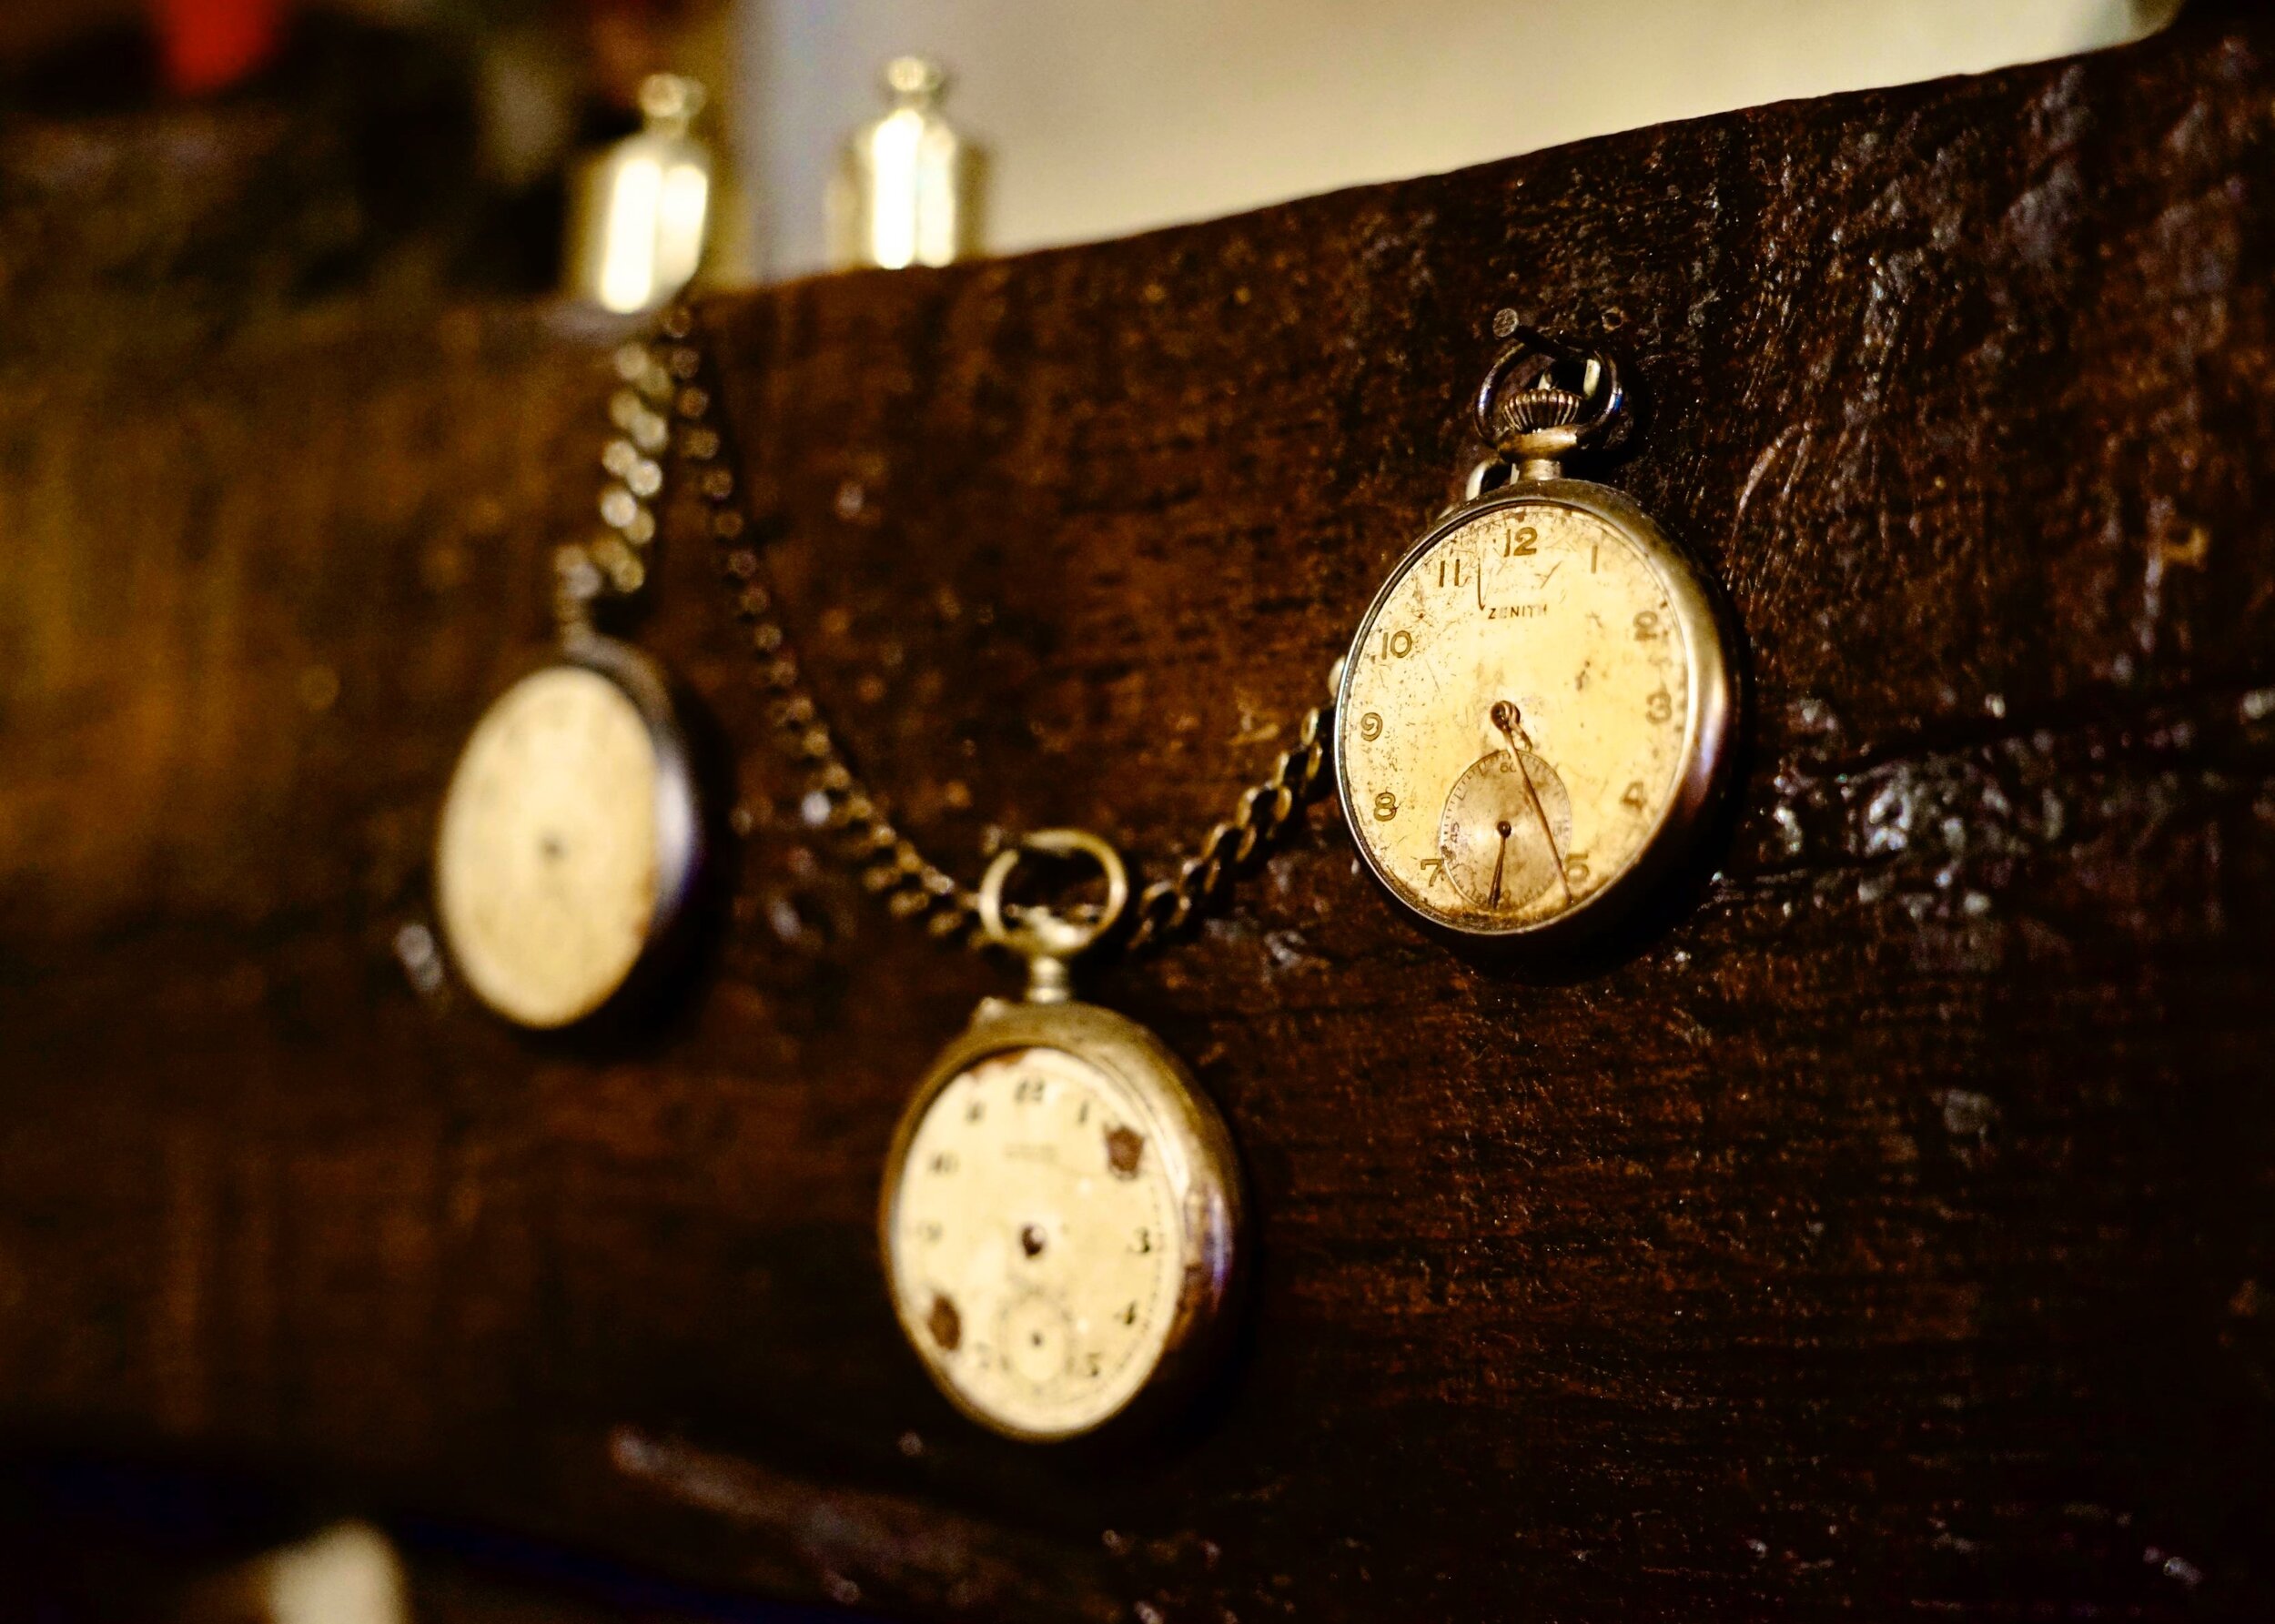  Pocket watches worn by Suzette’s grandfather during World War I. Suzette’s farmhouse is ornamented with many family artifacts, including this set of her grandfather’s pocket watches, which now adorns her mantle.  